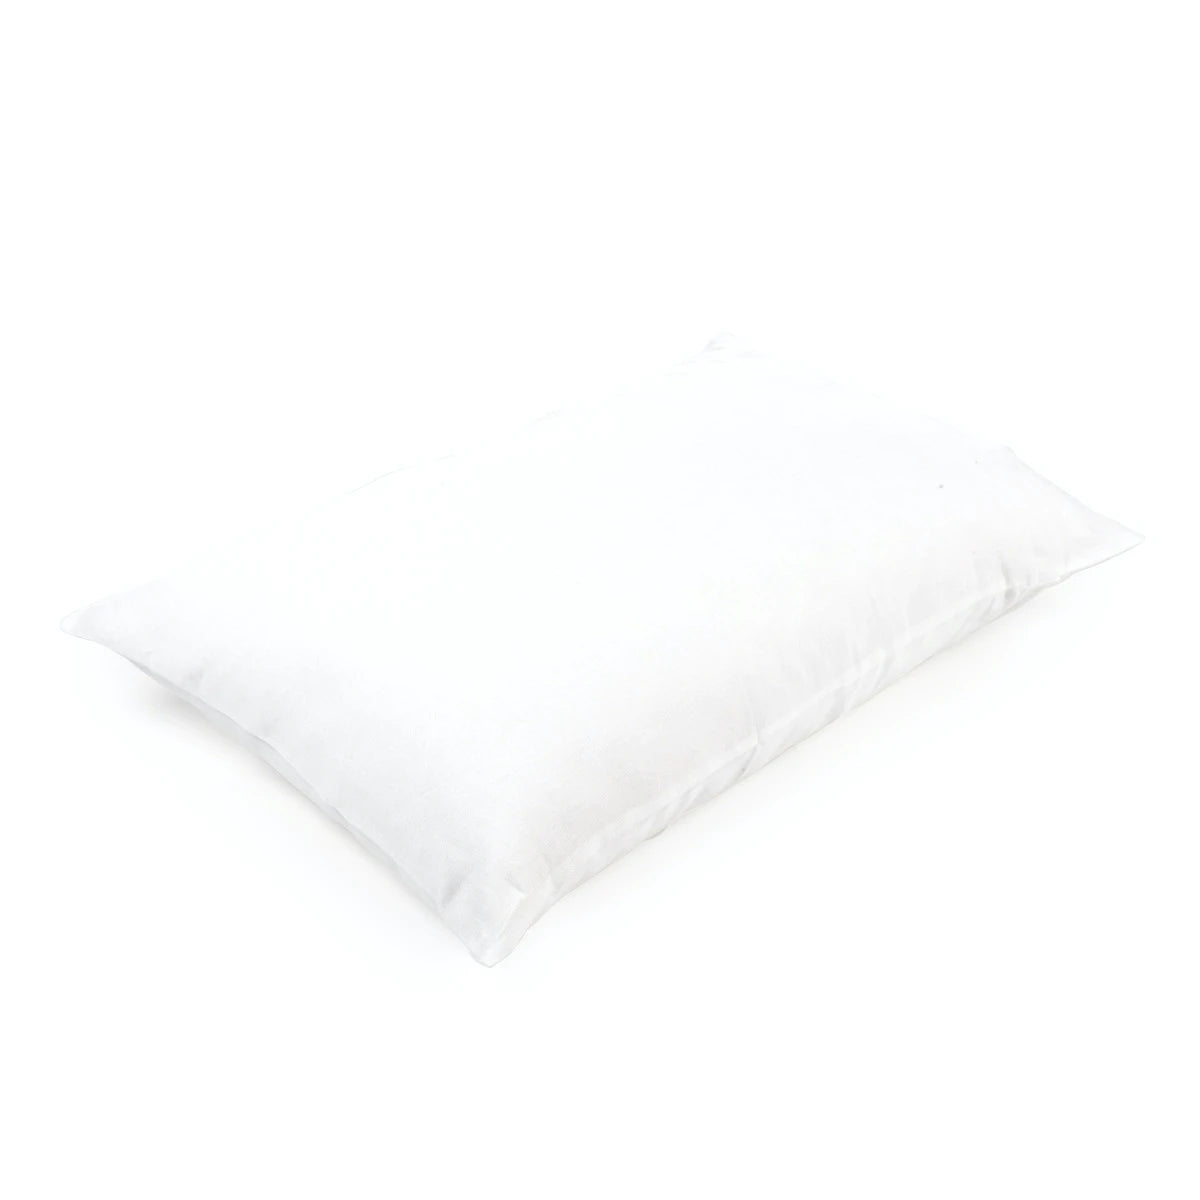 santiago pillow case & sham by libeco on adorn.house